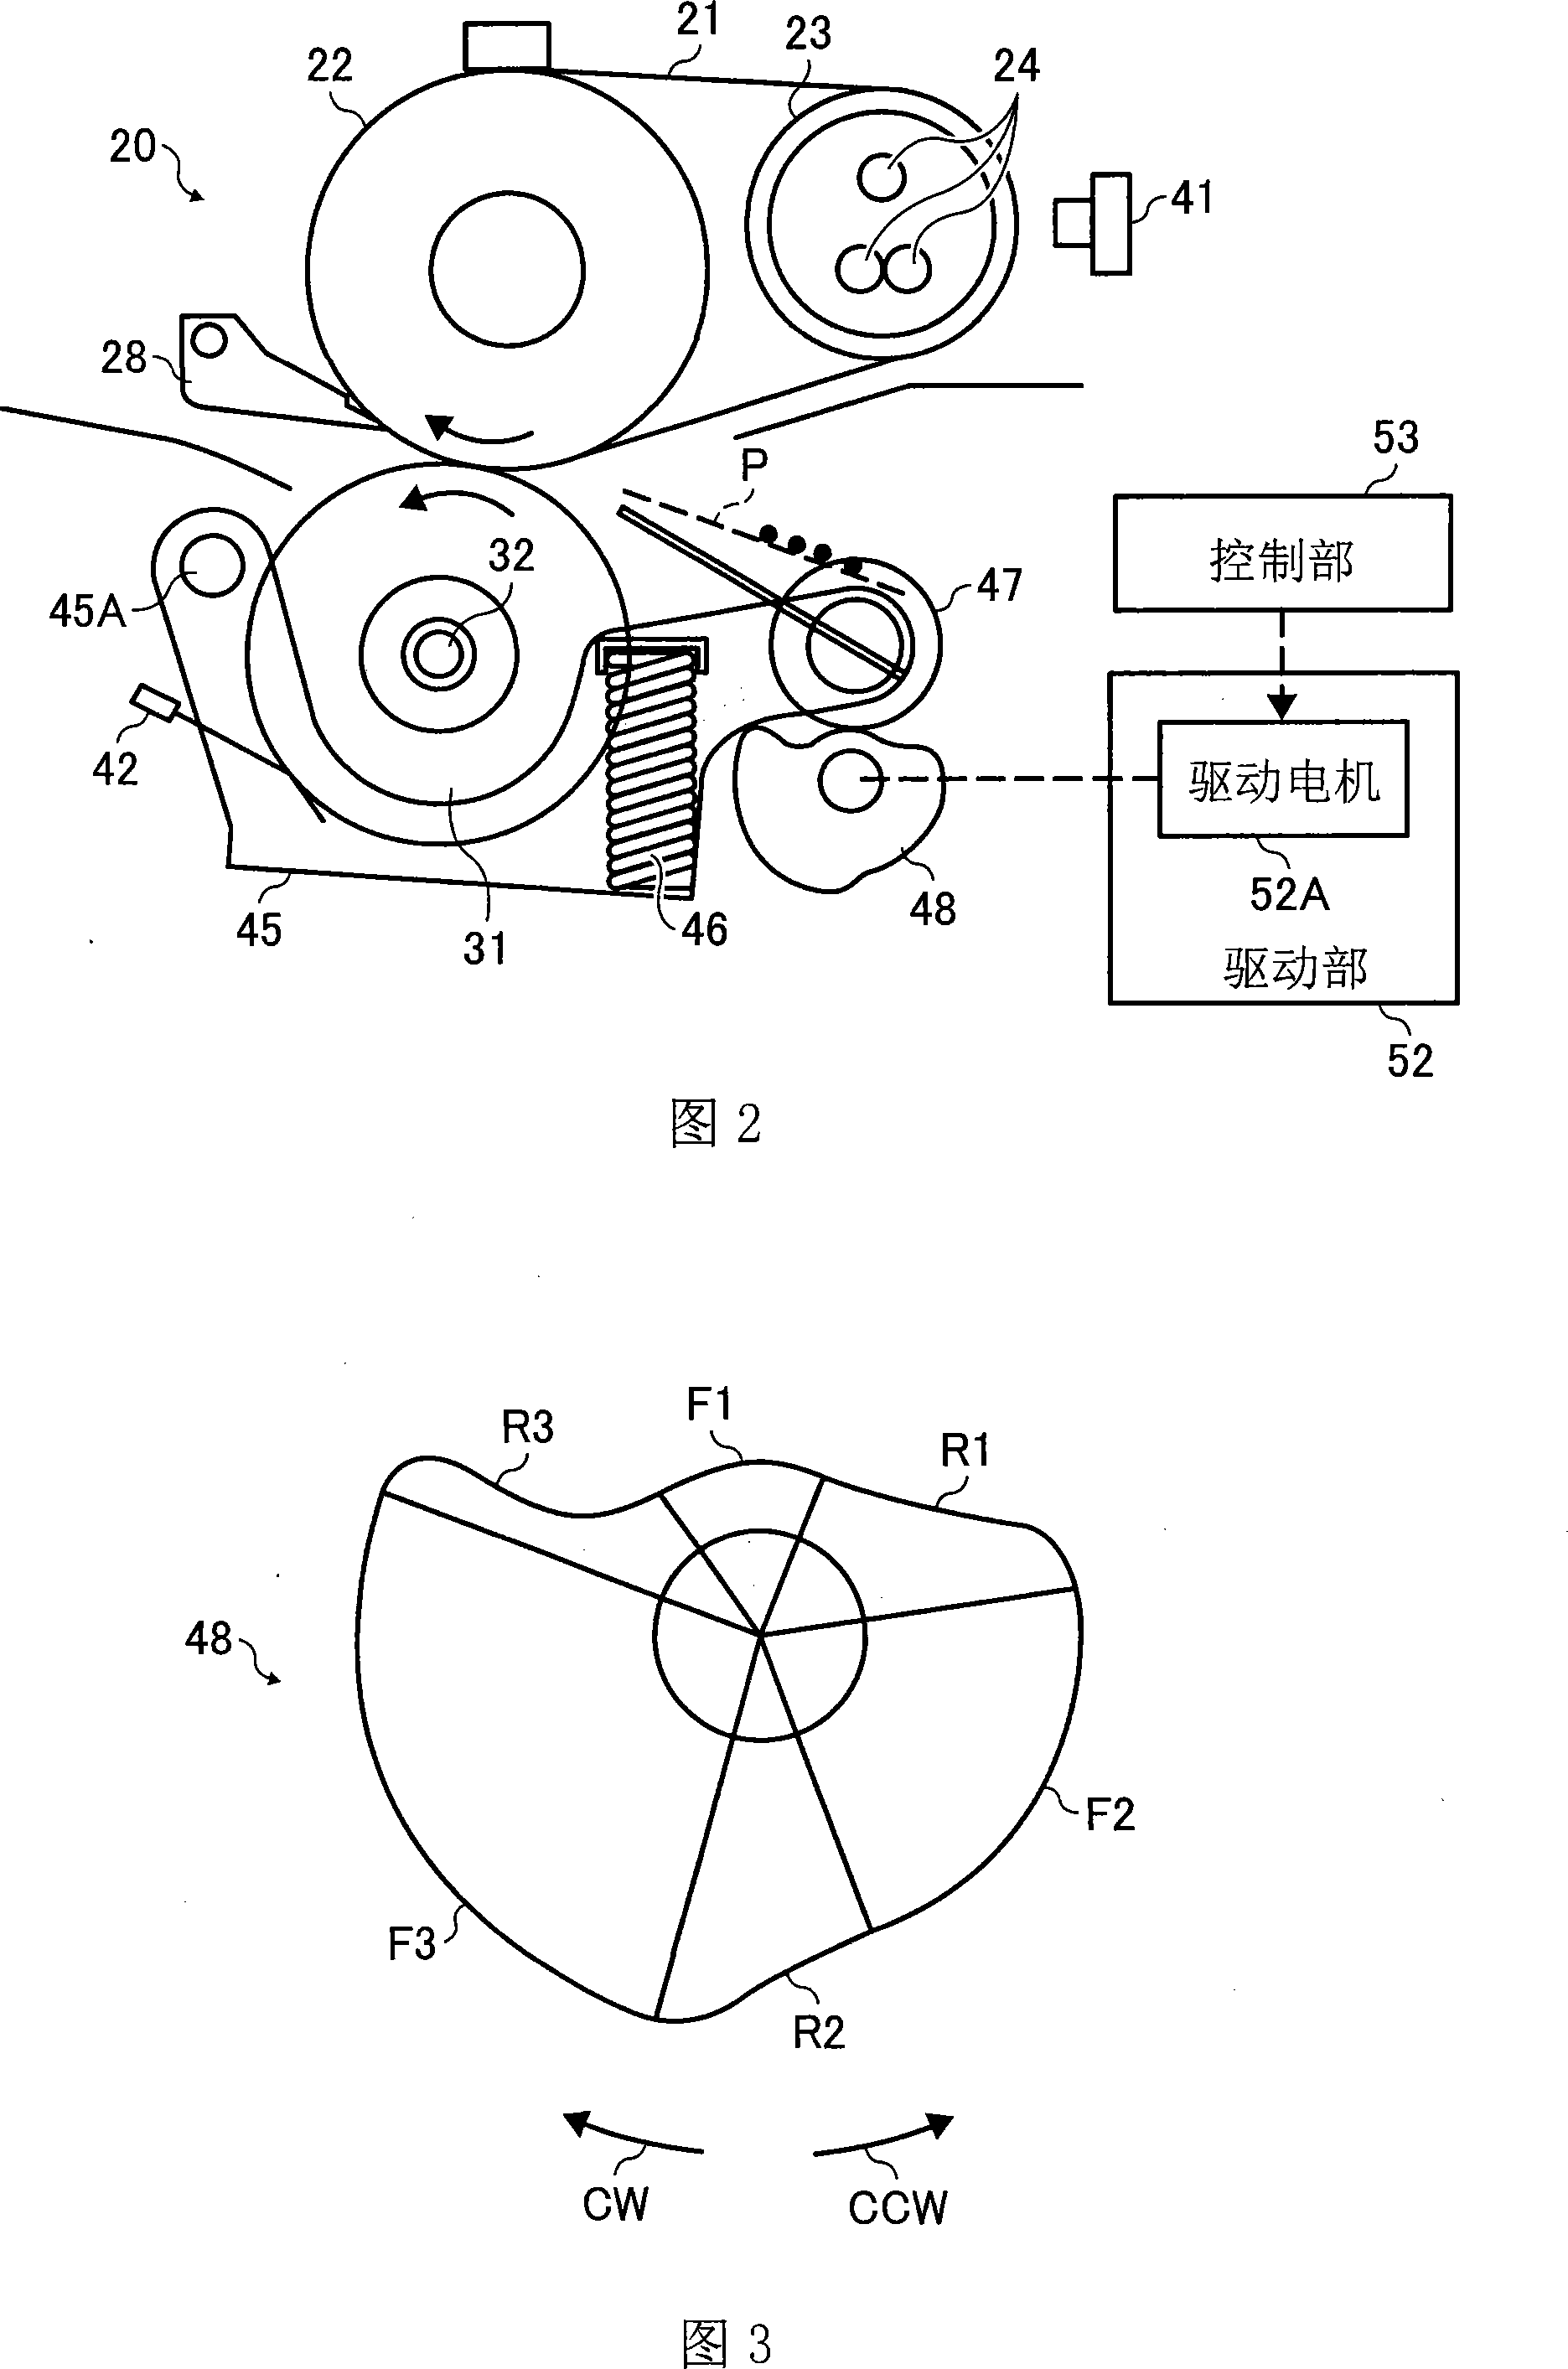 Fixer, image forming apparatus, and image forming method